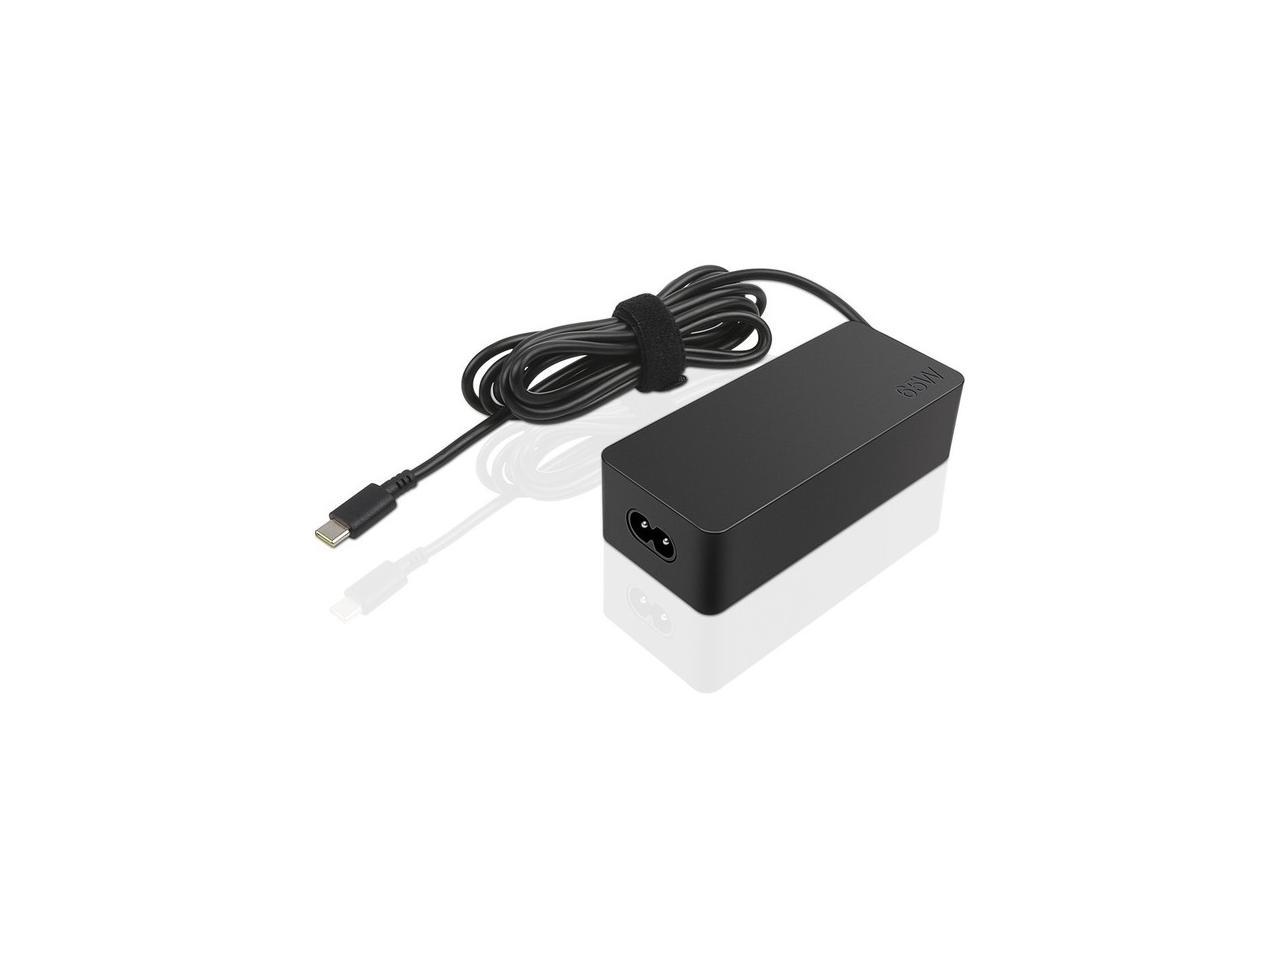 POWER ADAPTER-AC POWER ADAPTERS